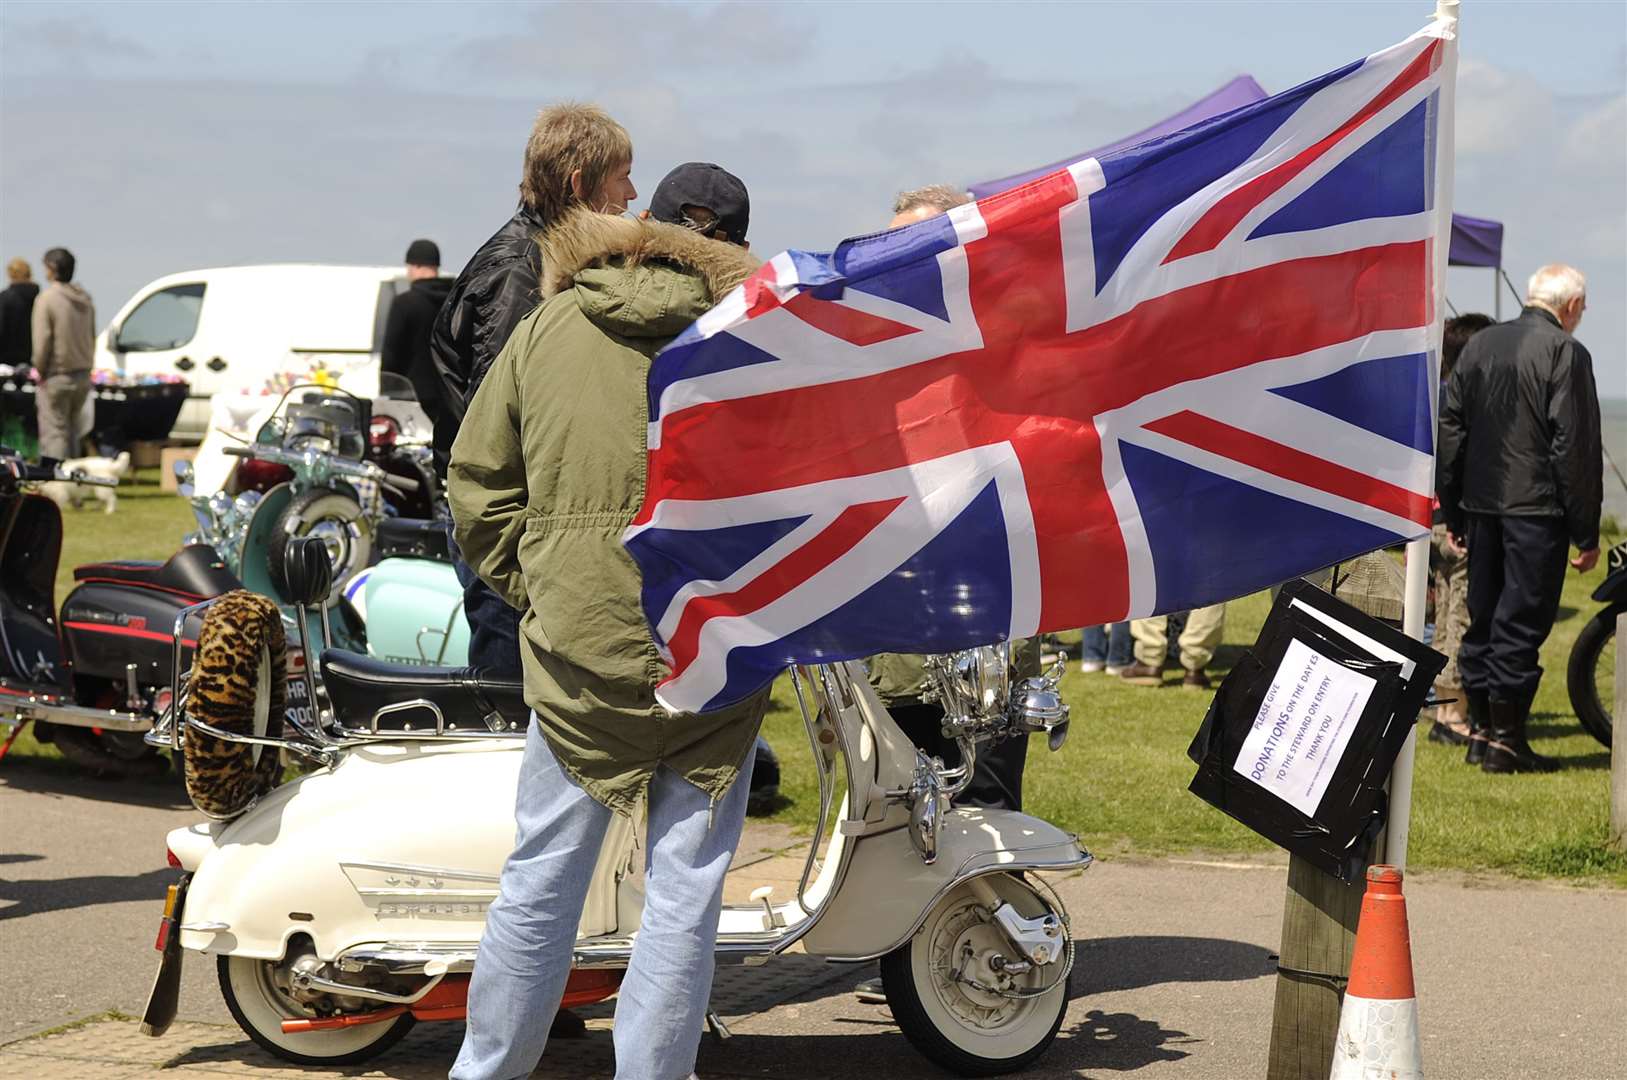 The Mod culture continues to be felt today. Picture: Barry Goodwin